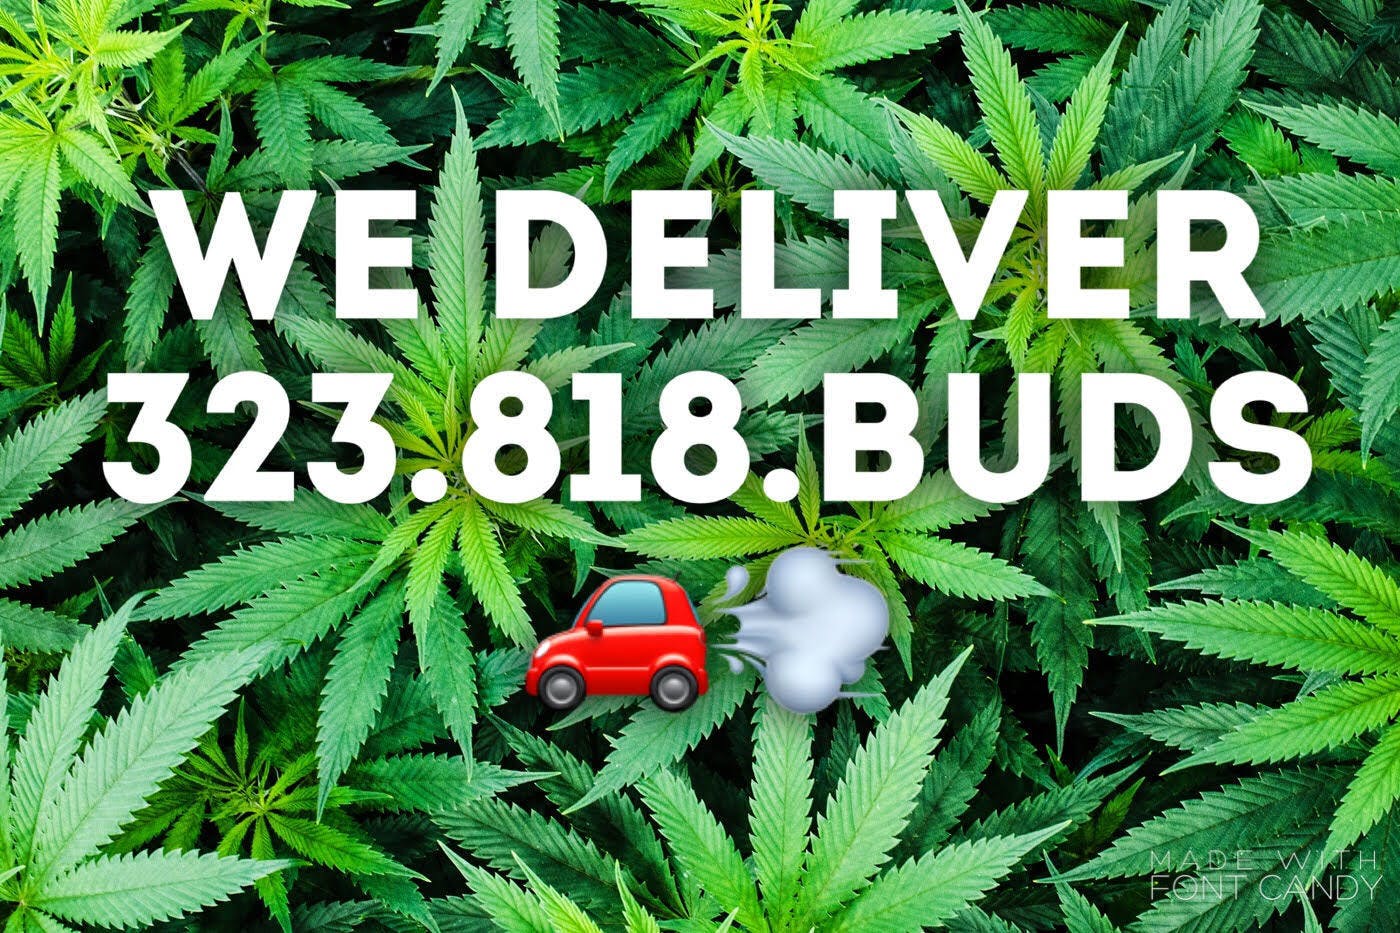 indica-we-deliver-call-323-818-buds